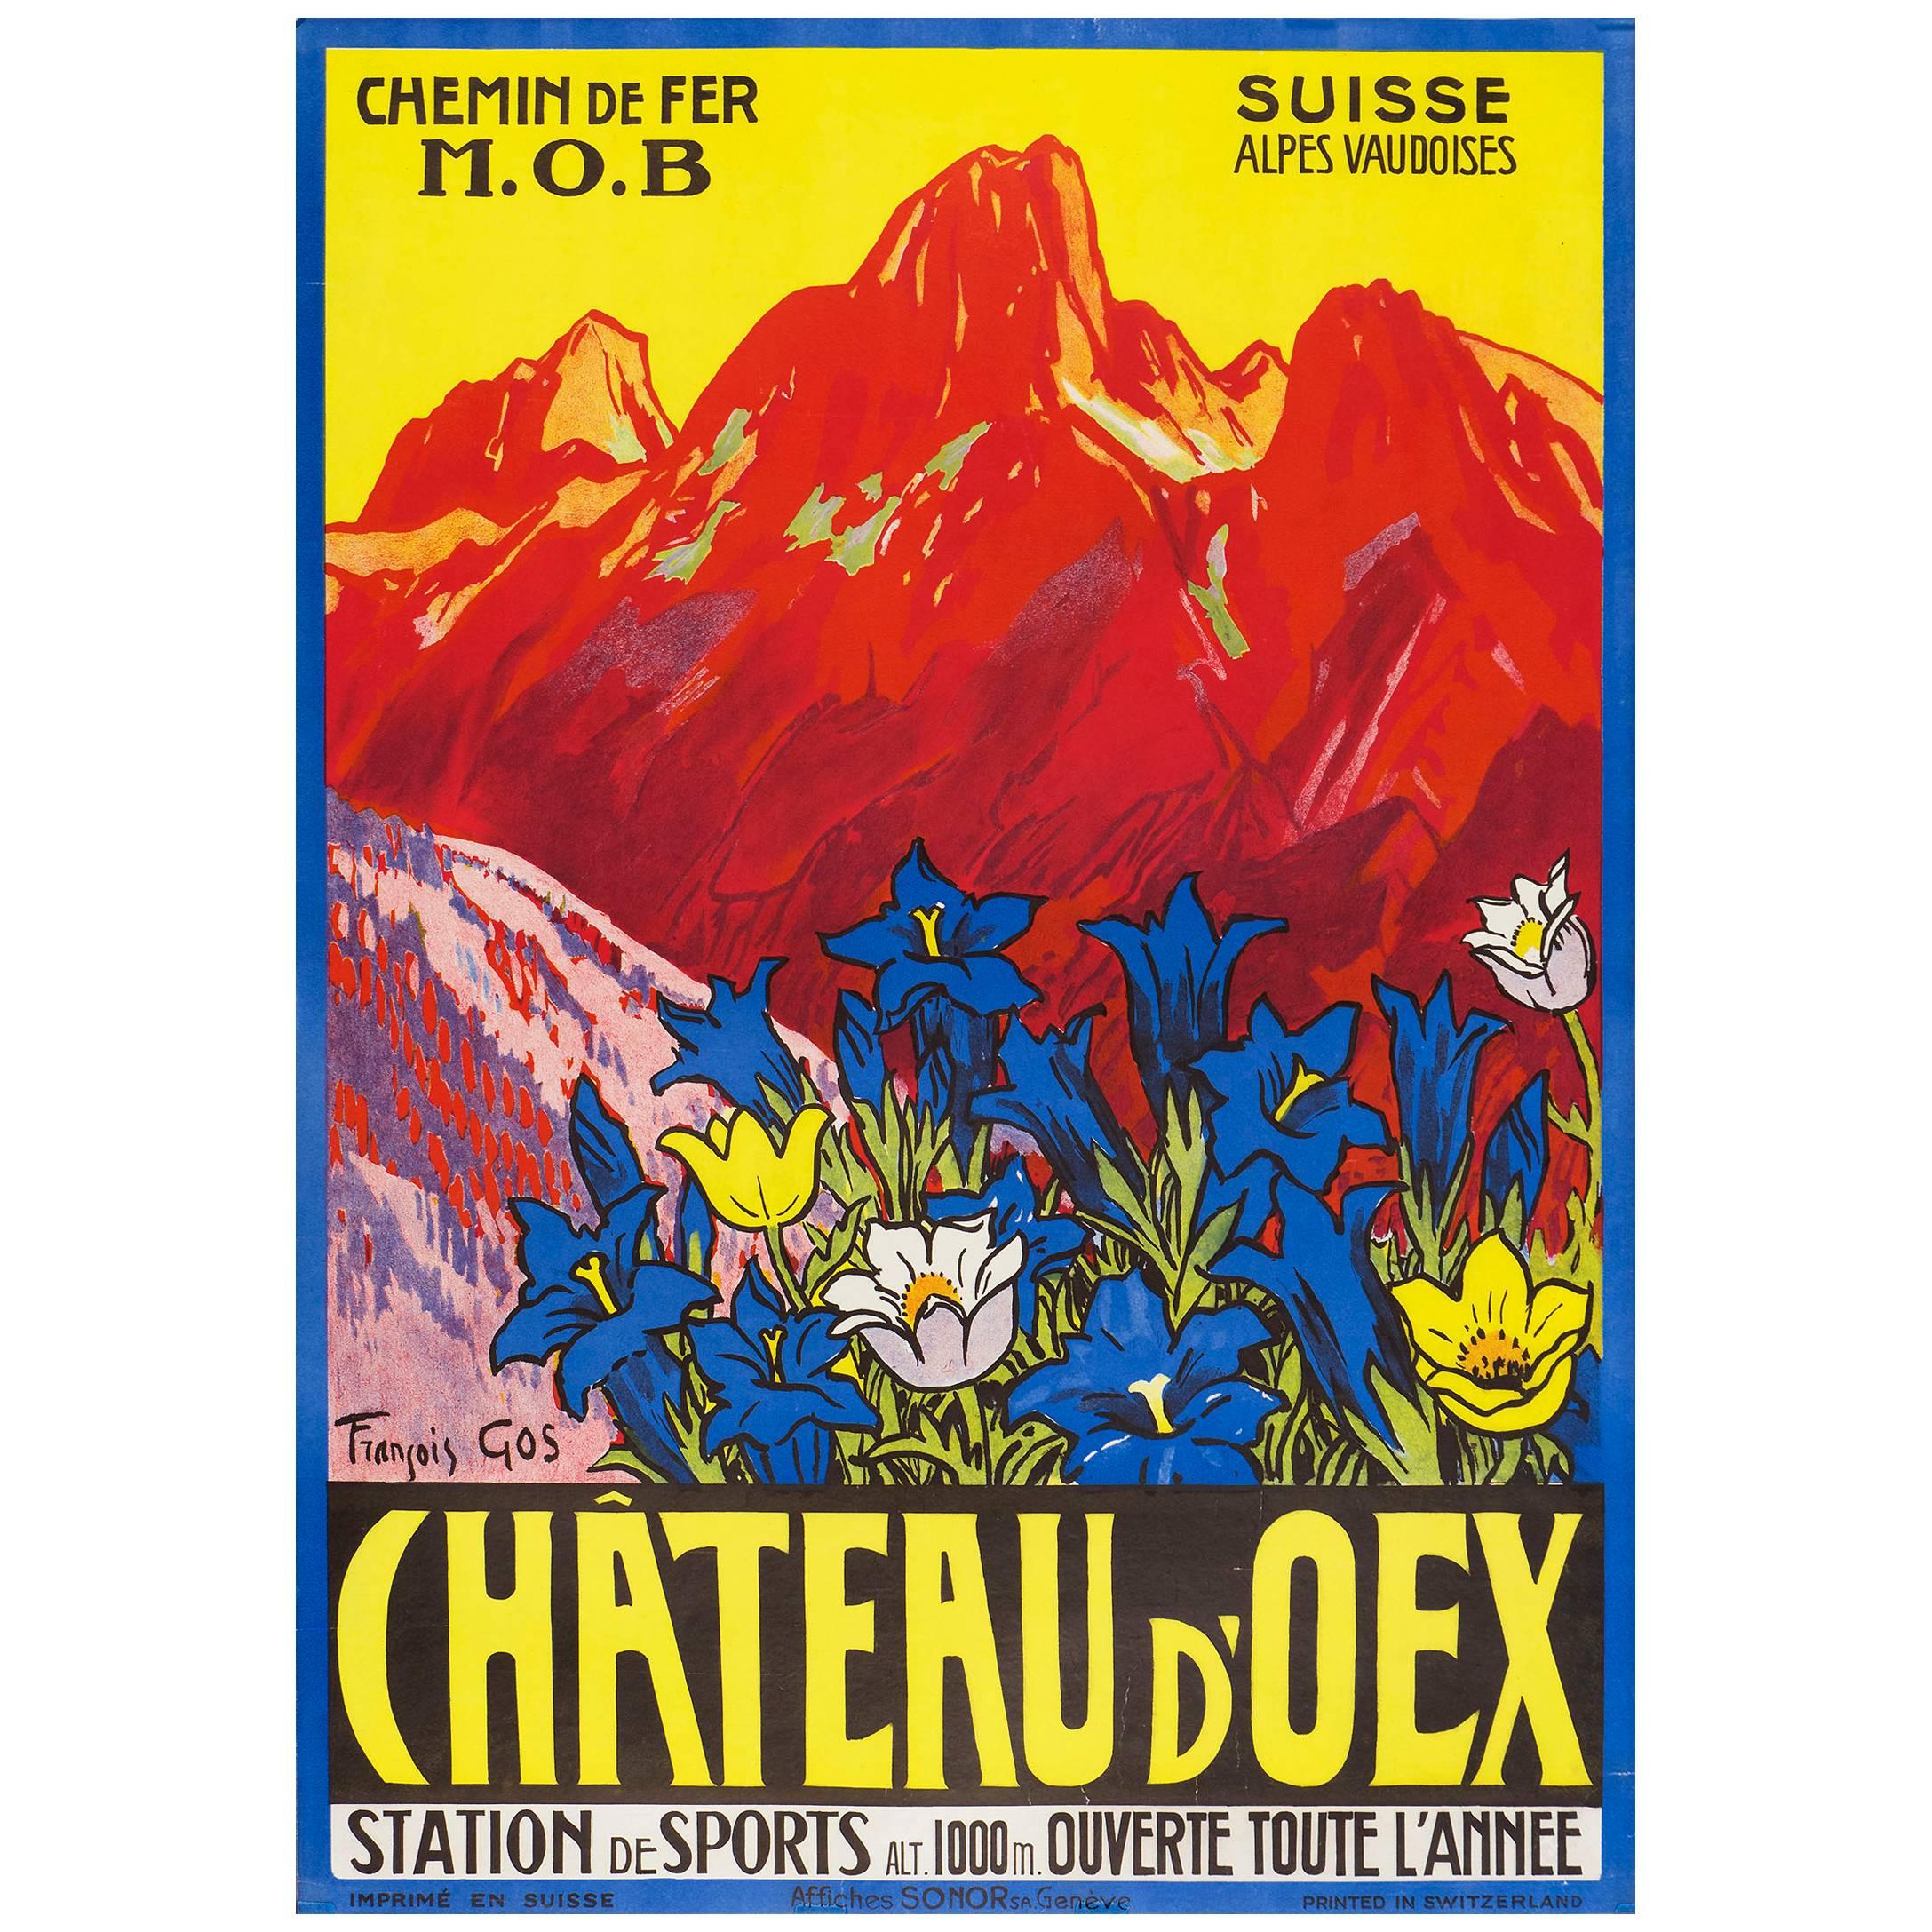 Vintage Swiss Alps Travel Poster by F. Gos for Chateau d’Oex–MOB Railroad